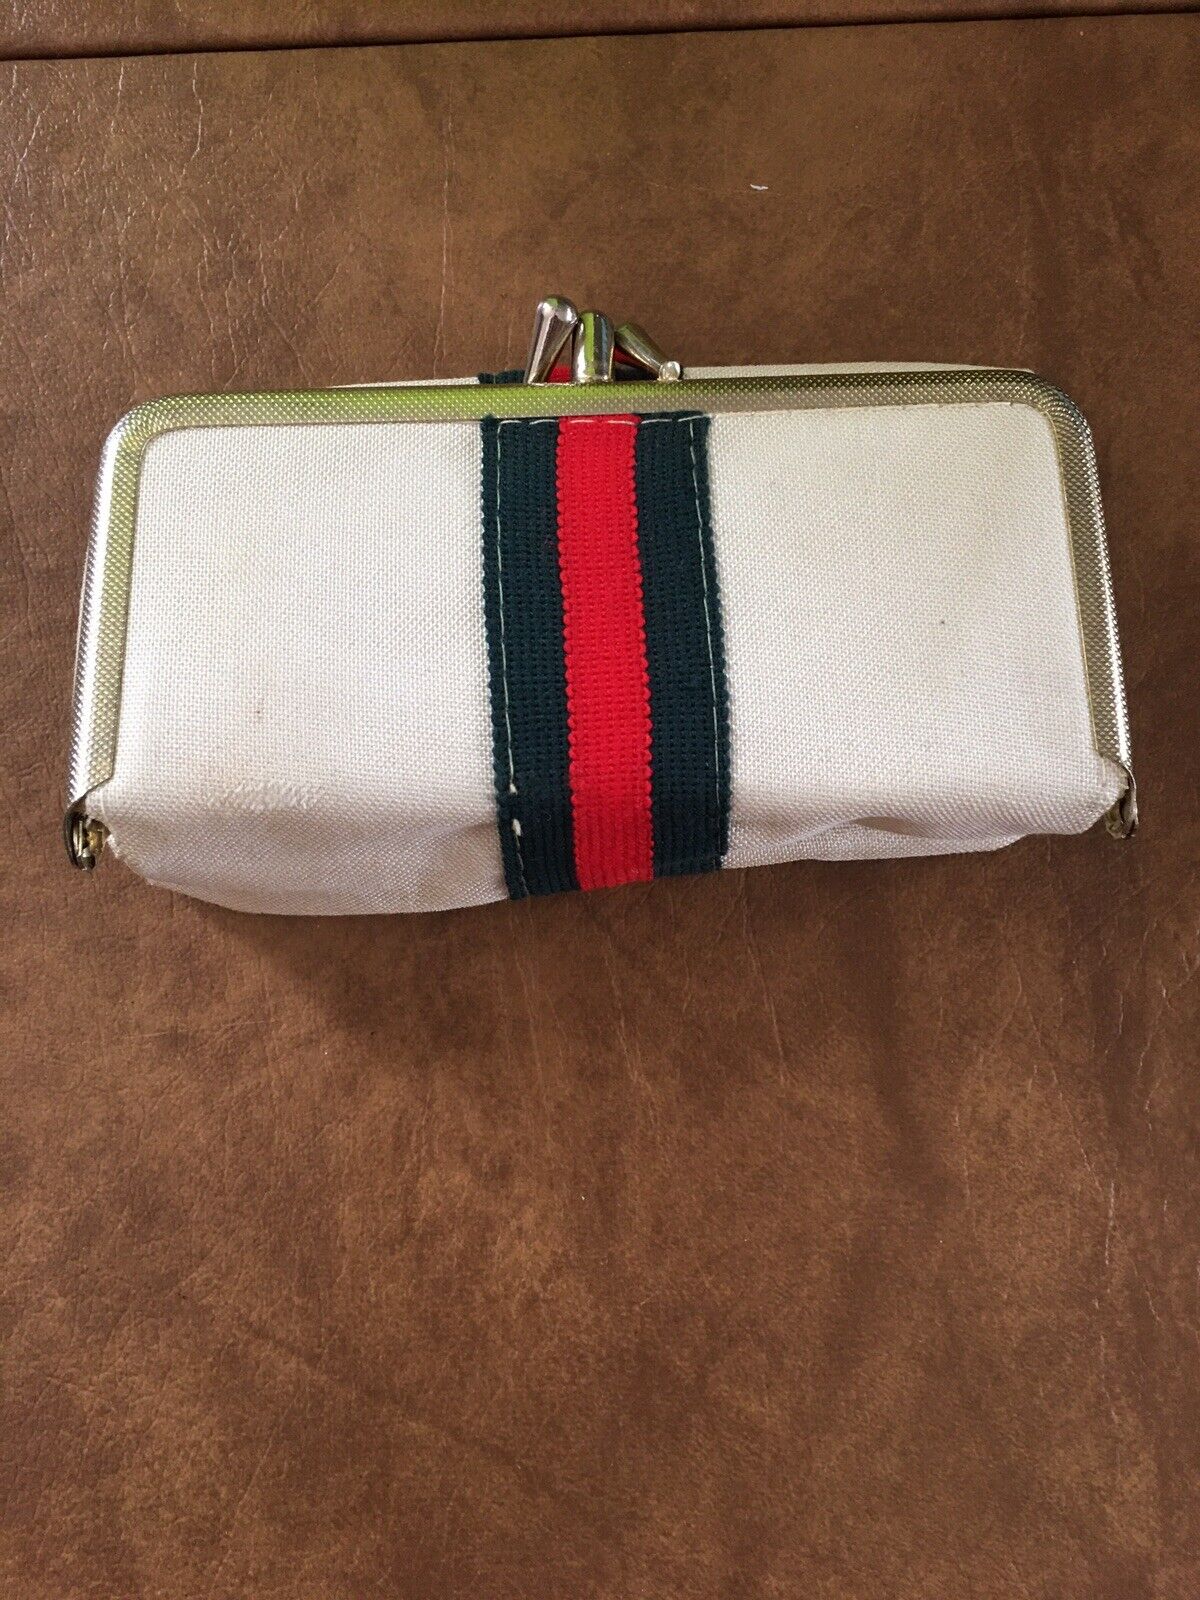 Vintage 1960's/70's White, Blue, Red Coin Purse And Nail/Sewing Kit